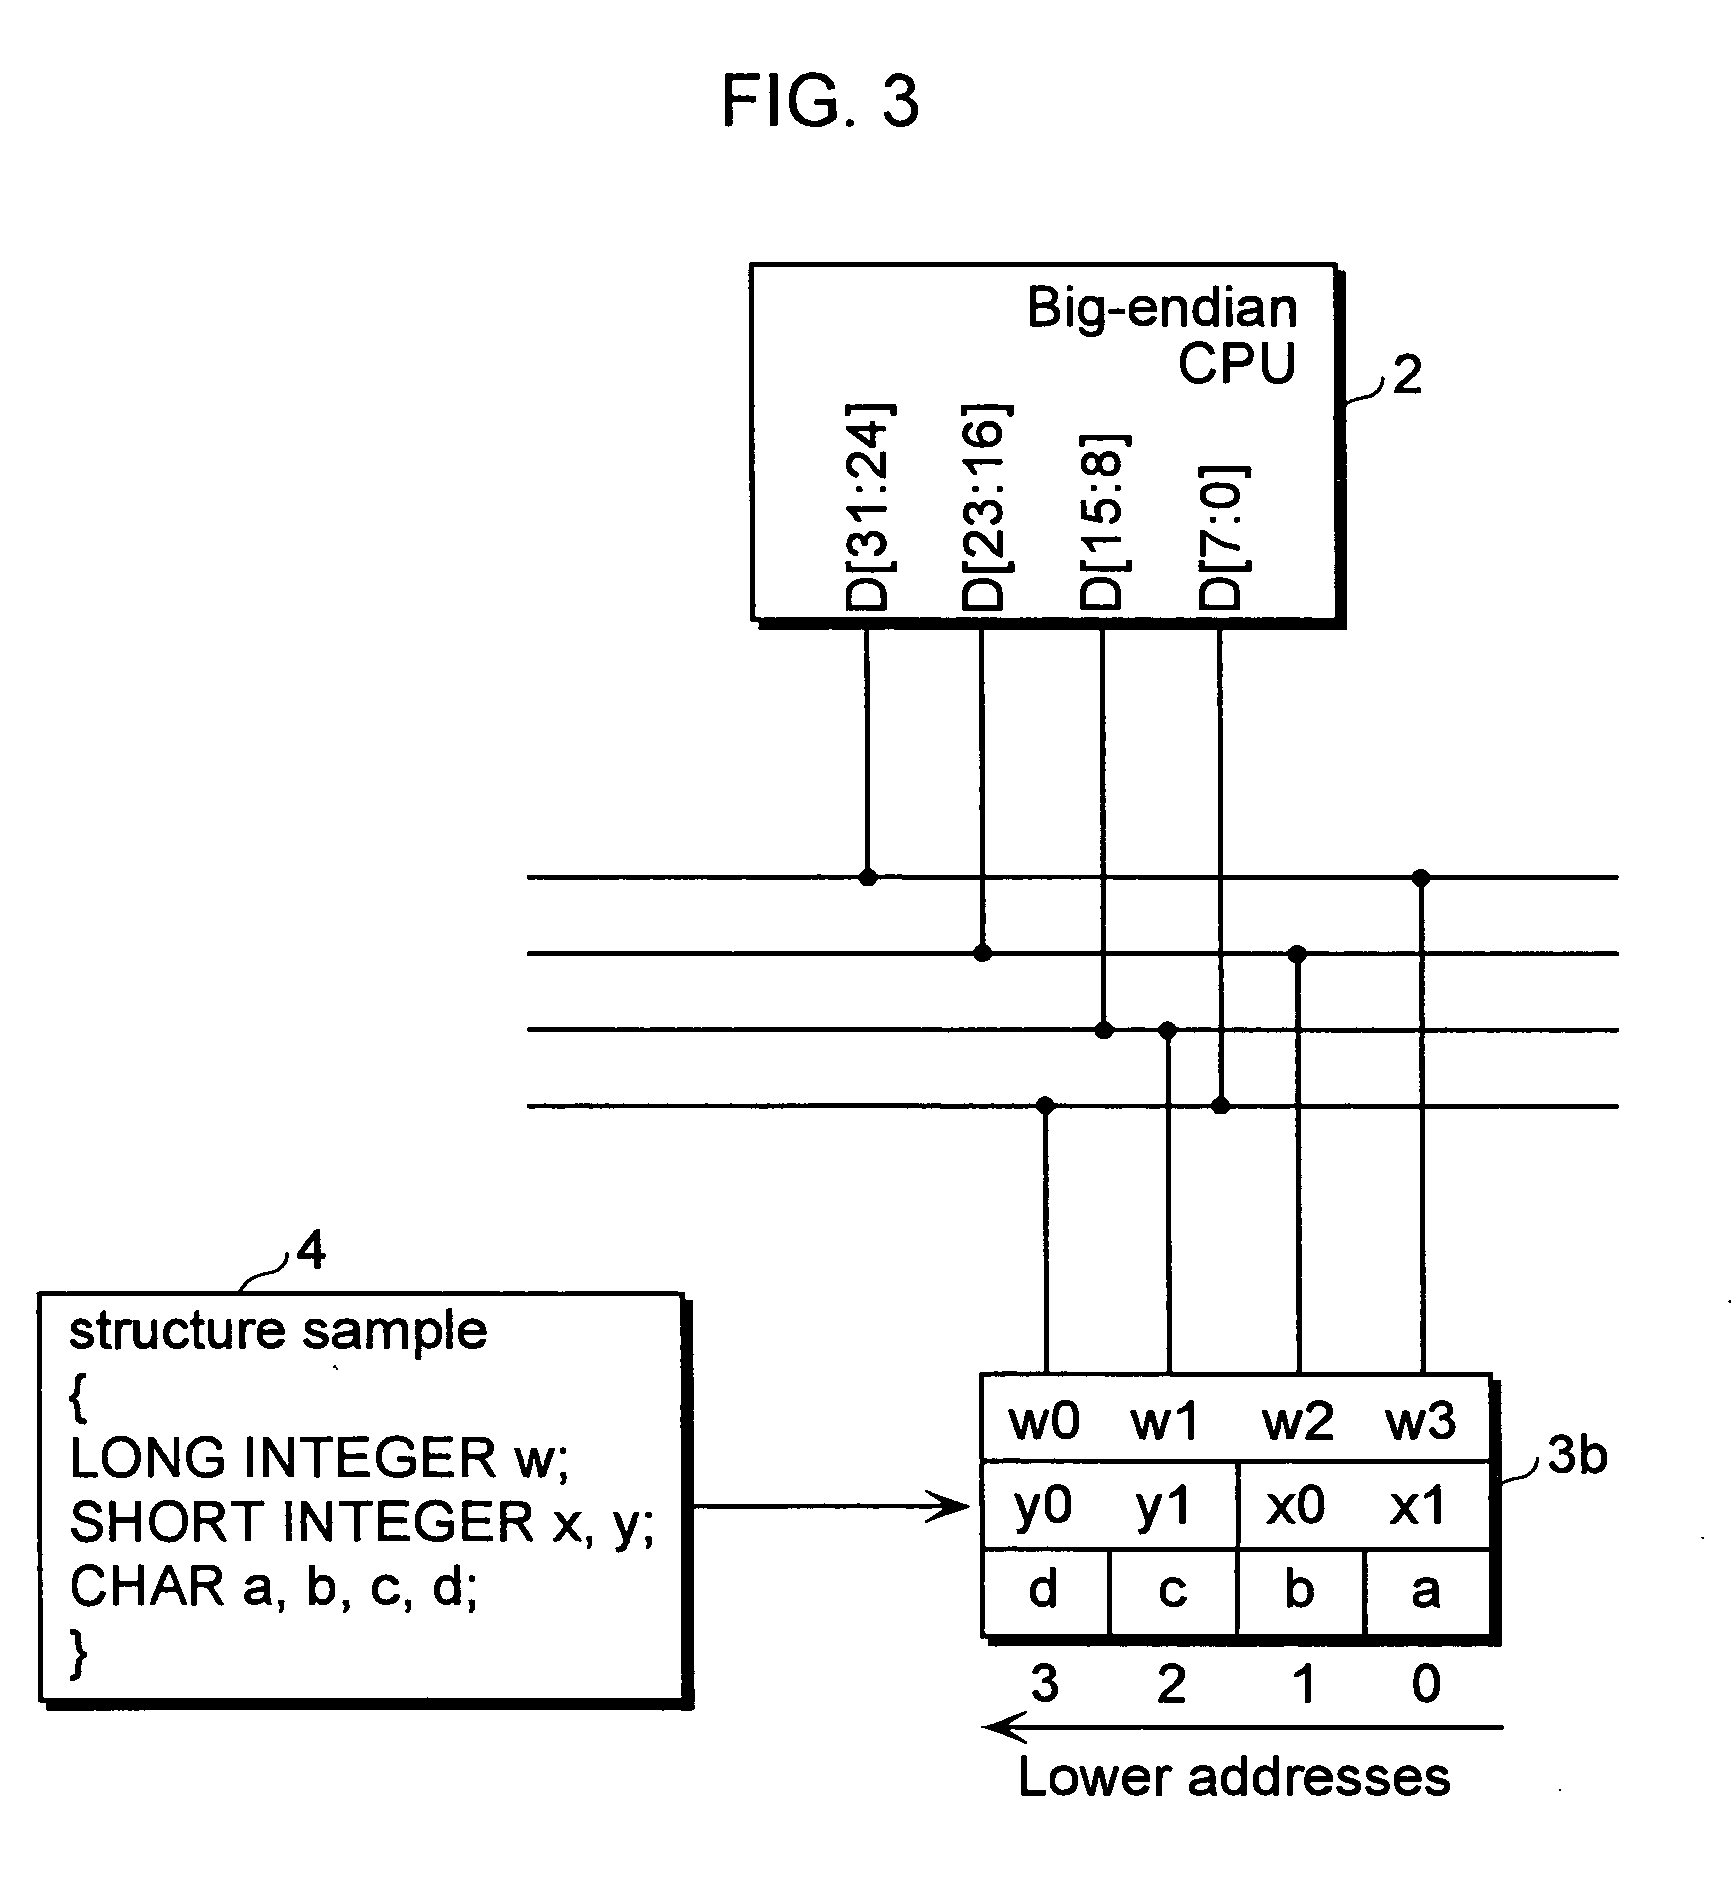 Data sharing apparatus and processor for sharing data between processors of different endianness